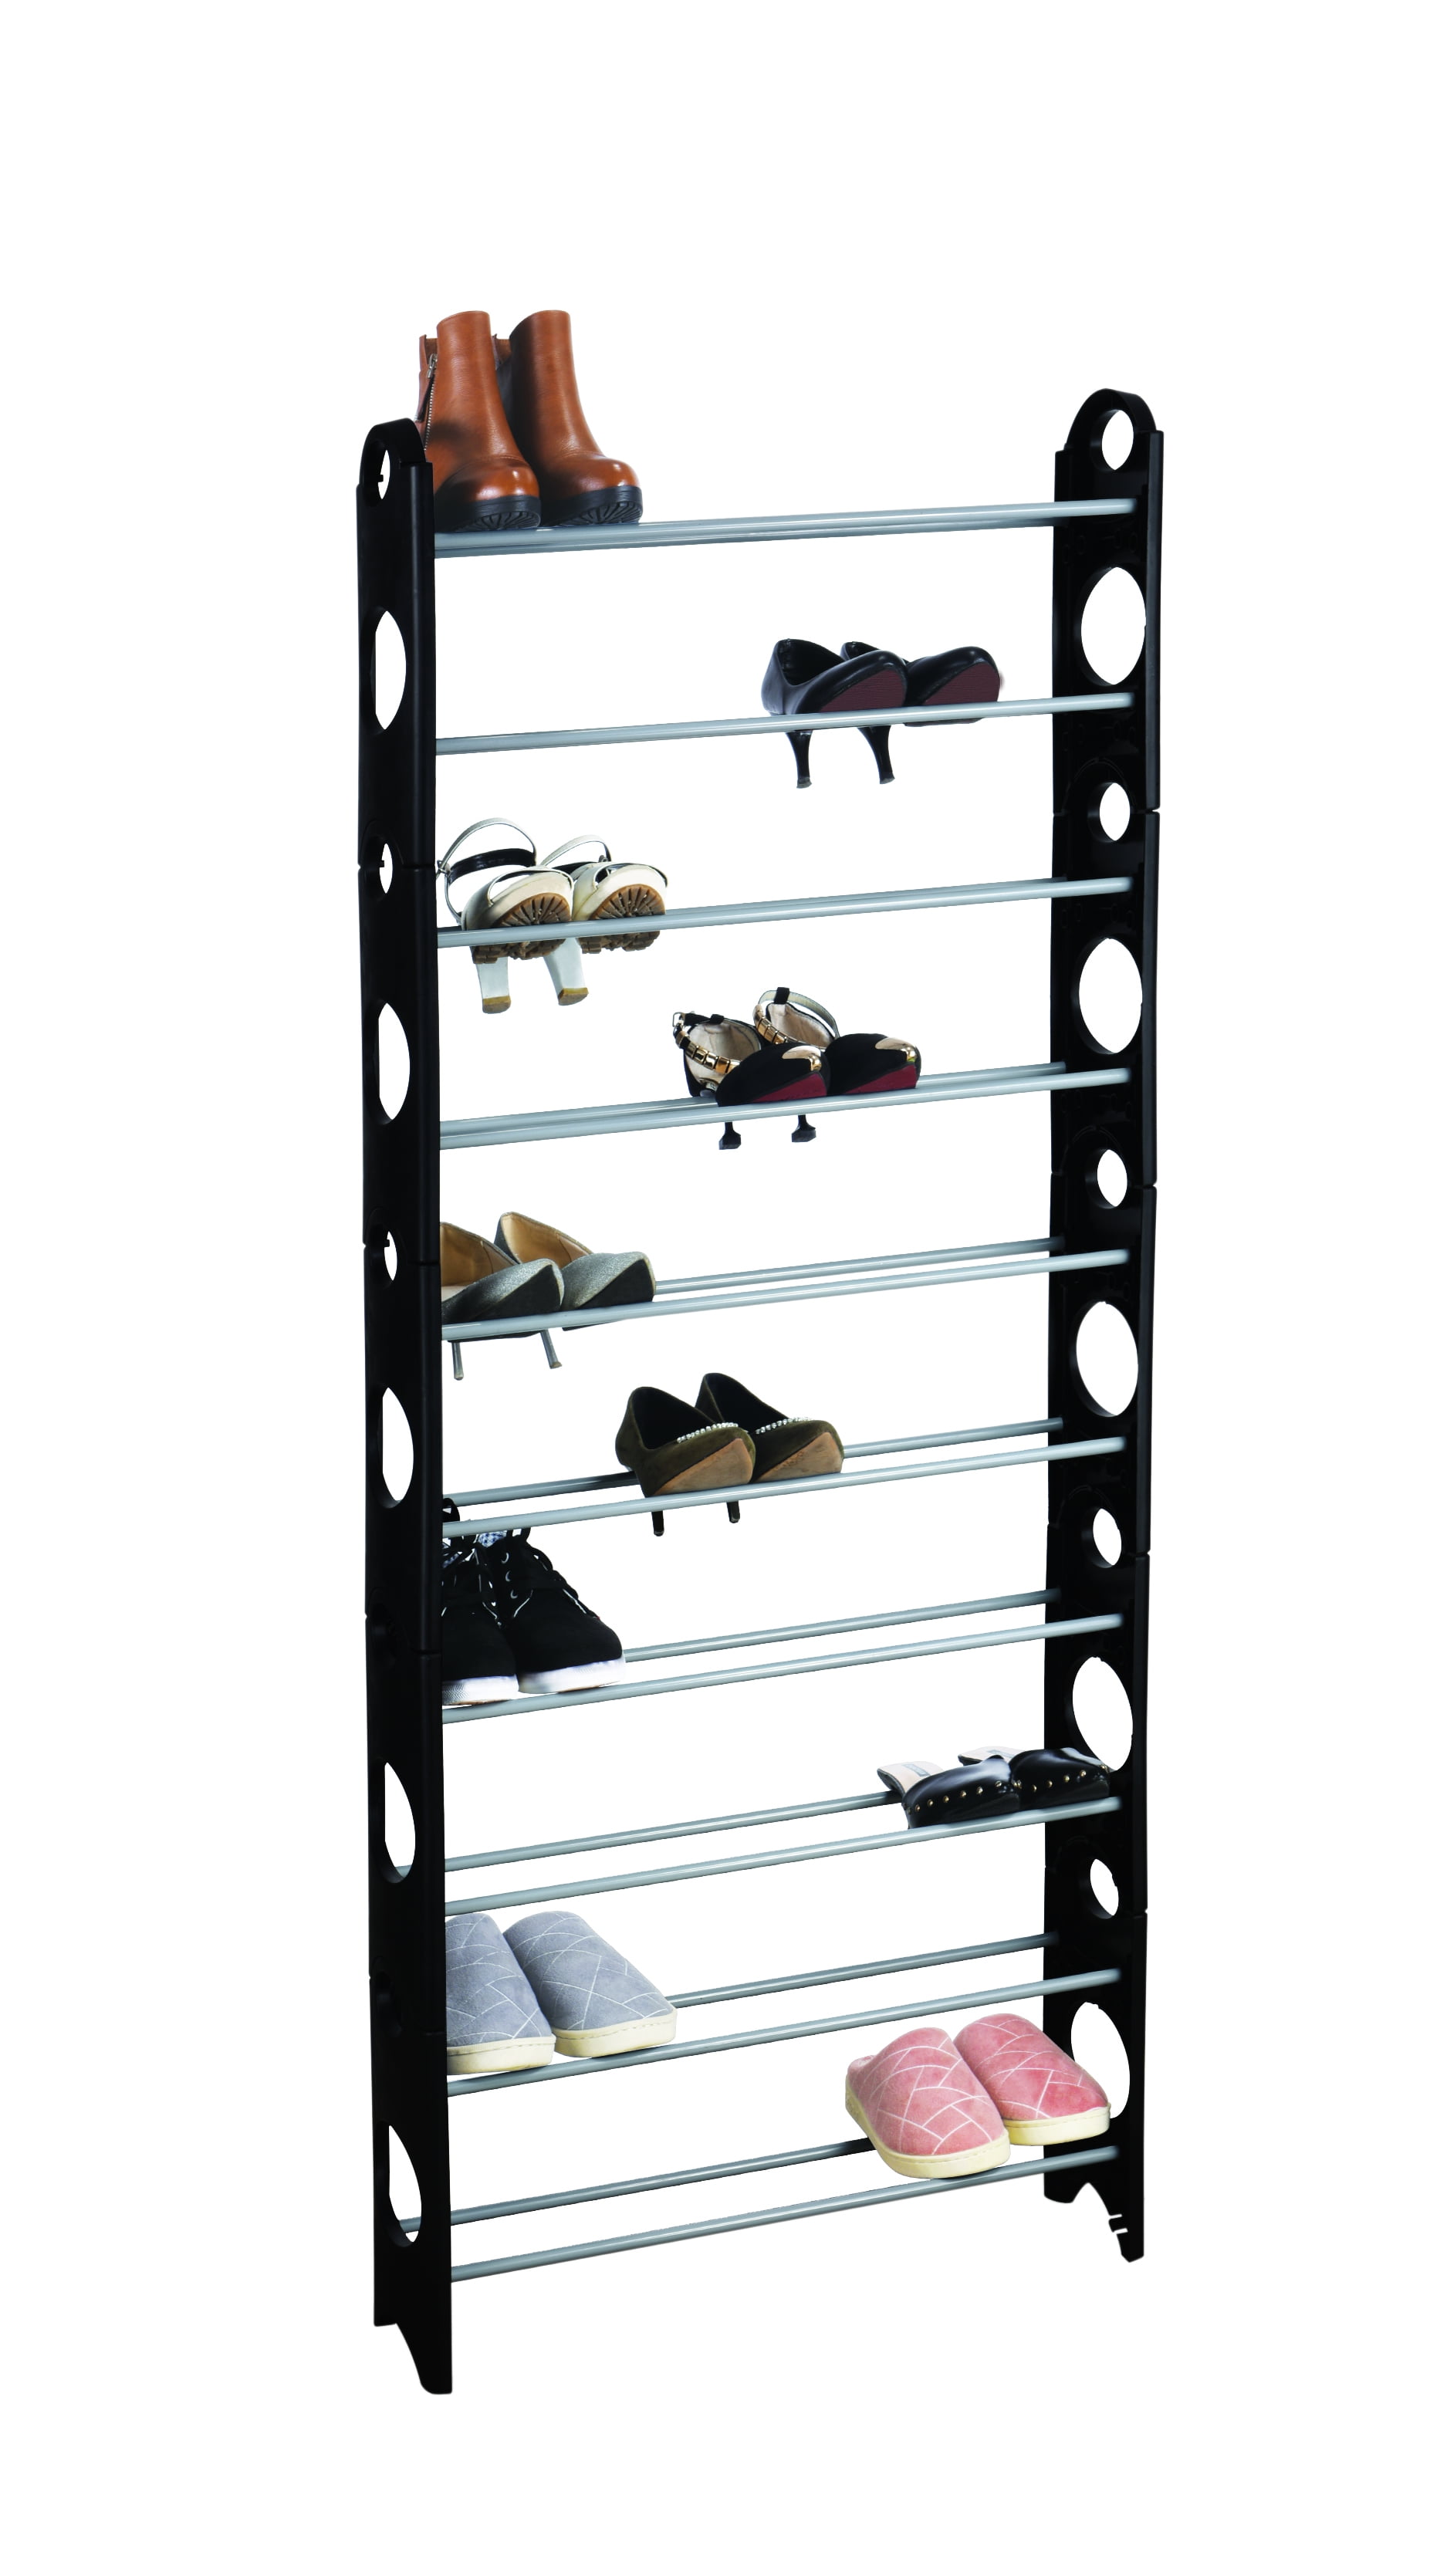 10 Tier Shoe Rack Stand 30 Pair Shoe Rack Organiser Storage Solution BOXED GIFT 